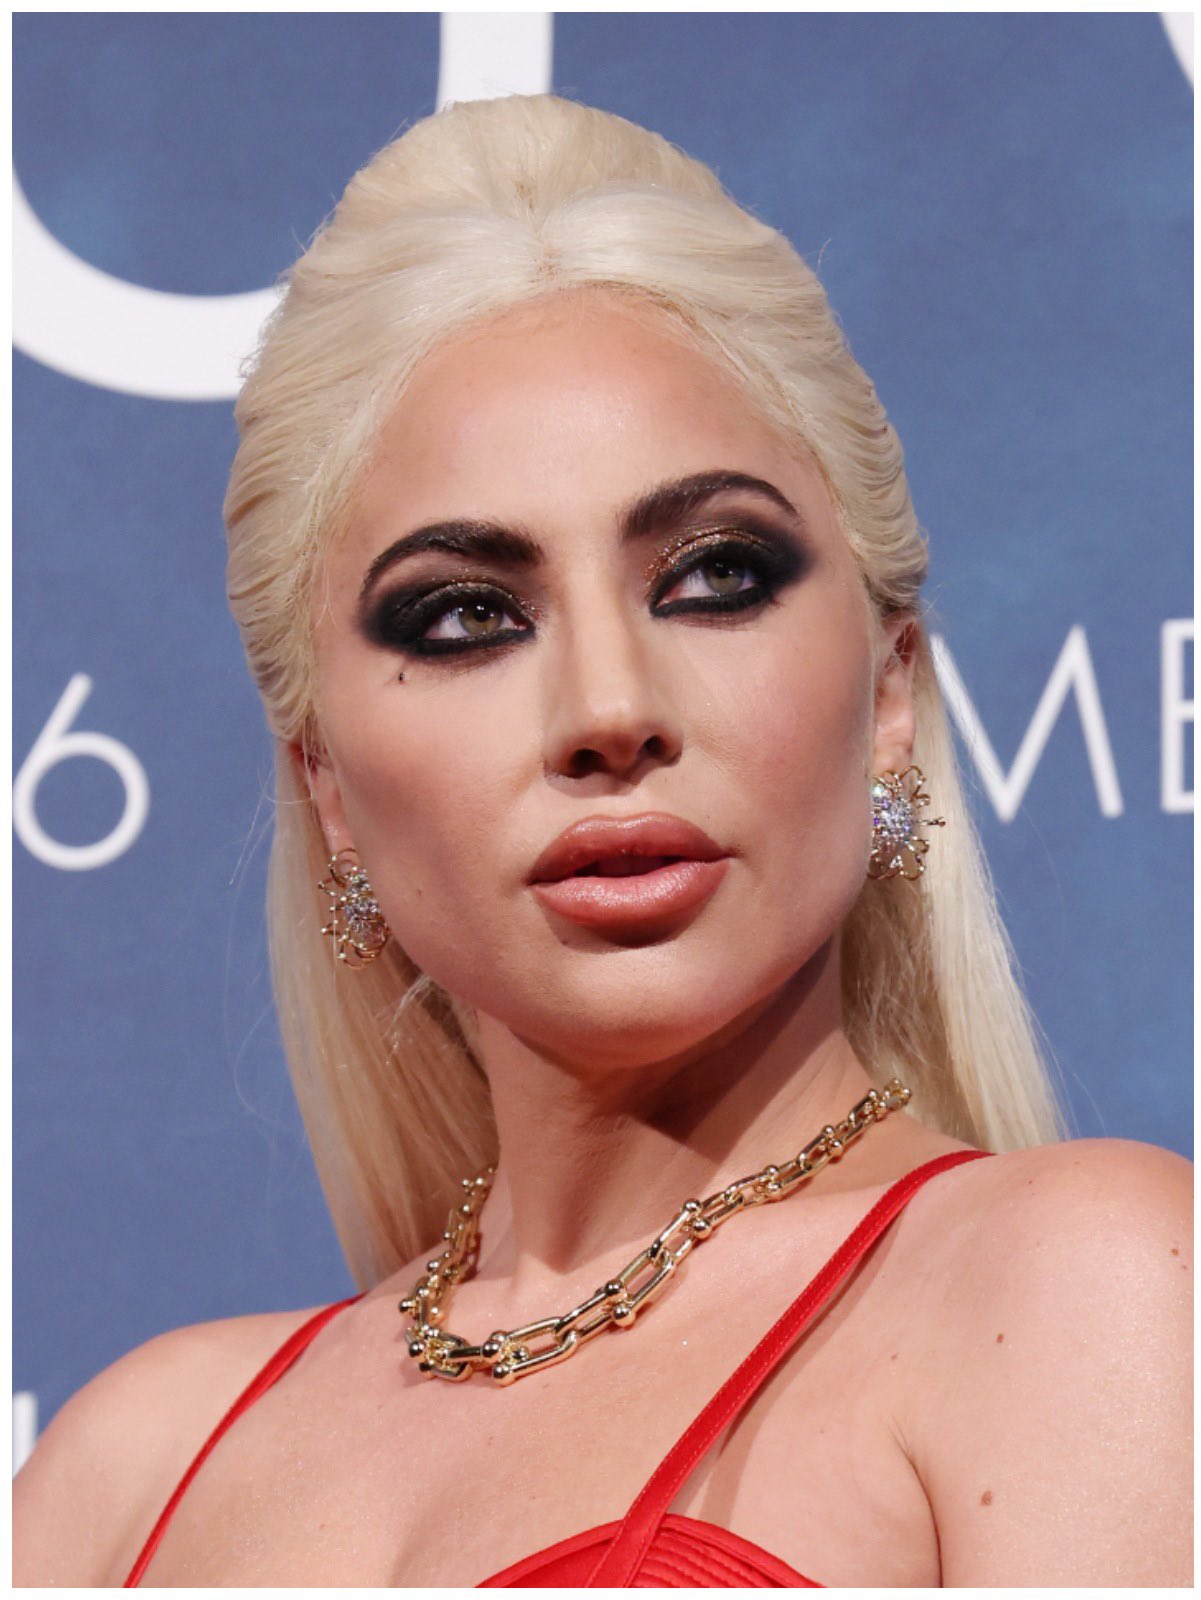 ed on X: "Lady Gaga tried to investigate the identity of the BBC nonce  herself - "I looked for evidence" https://t.co/FbjKgRhM1s" / X